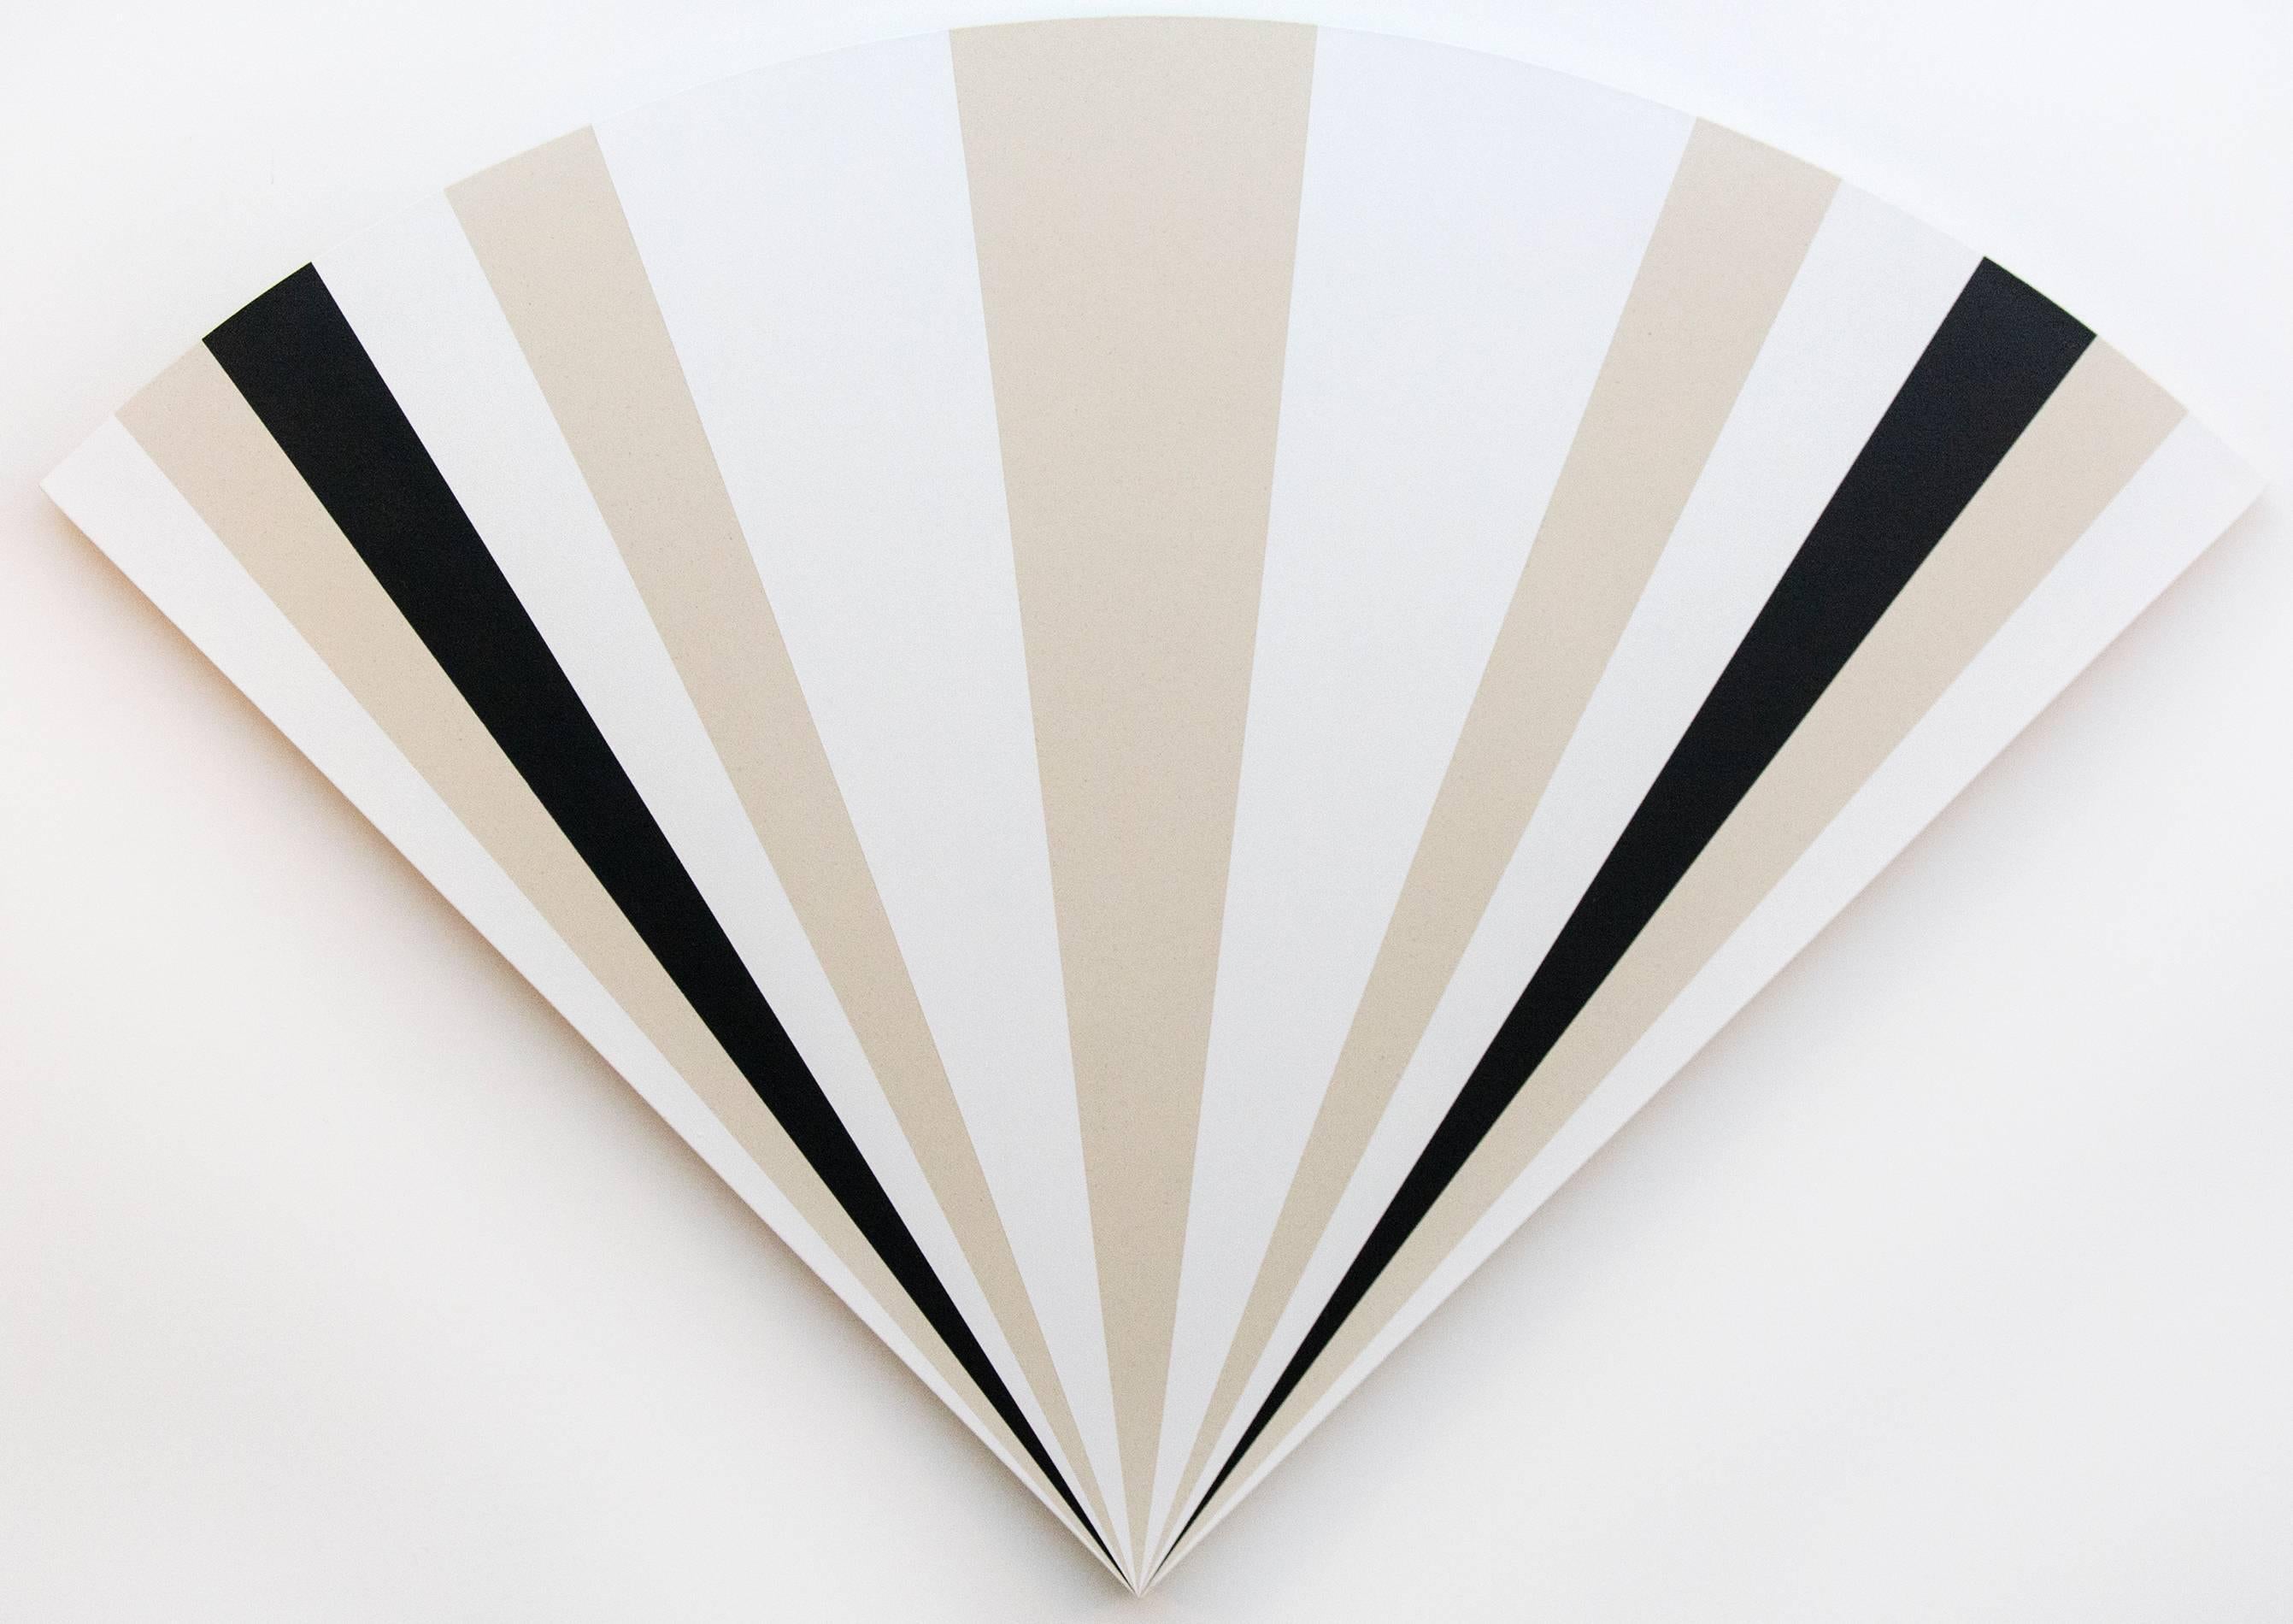 Aron Hill Abstract Painting – Fan with 1231212121321 - alternating black & white sequence in art deco style